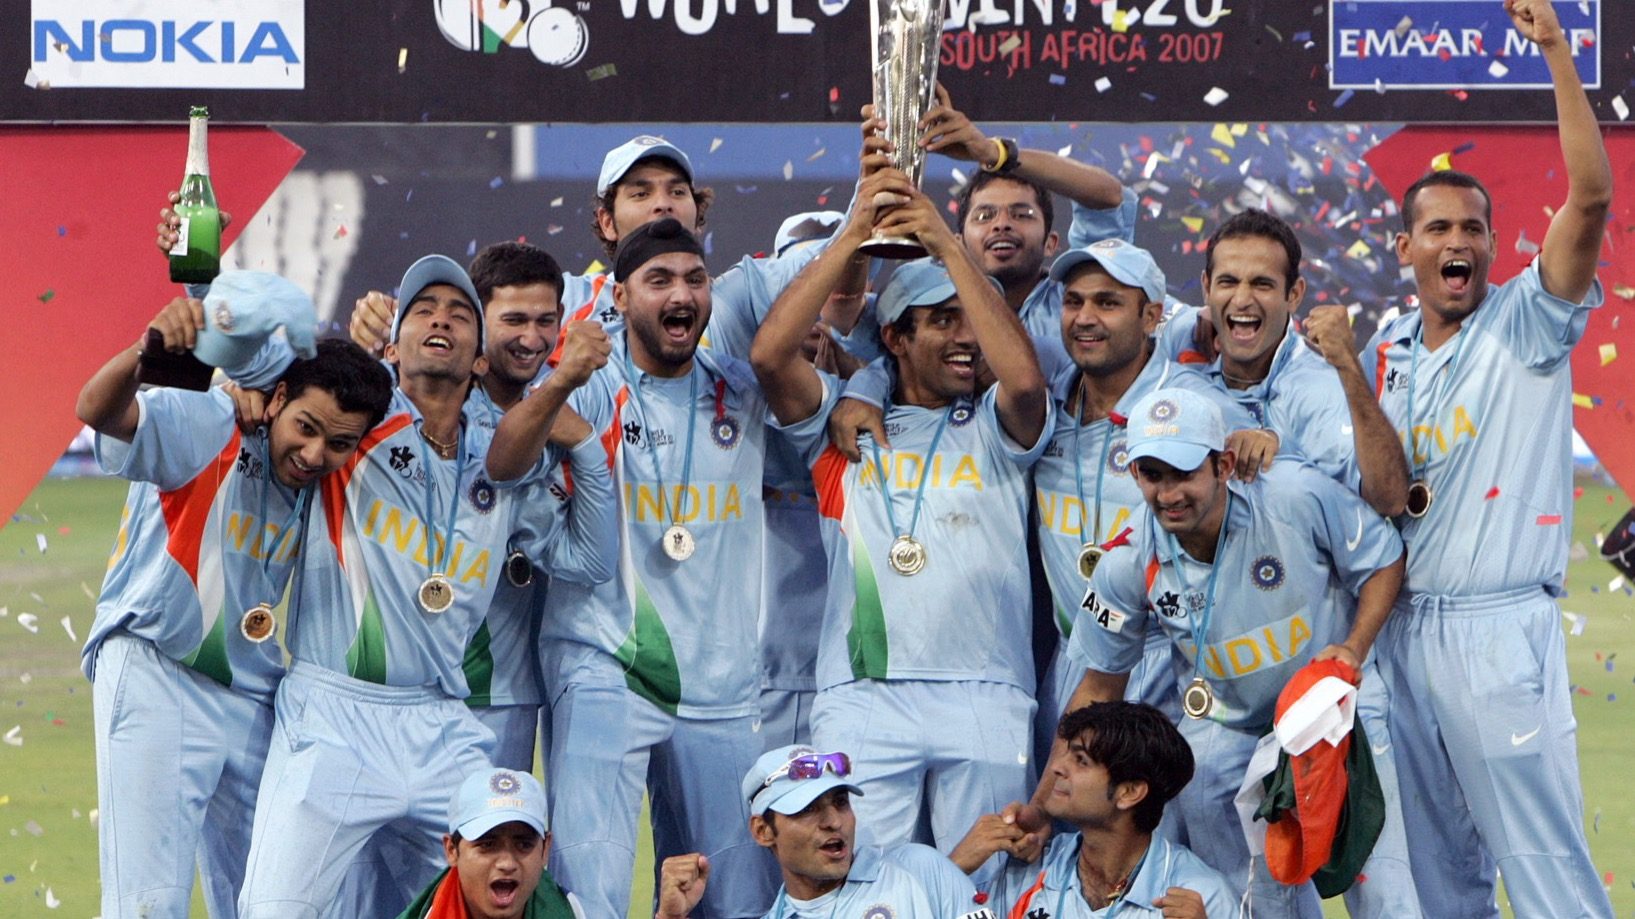 T20 World Cup 2007 India squad: Know the champion team